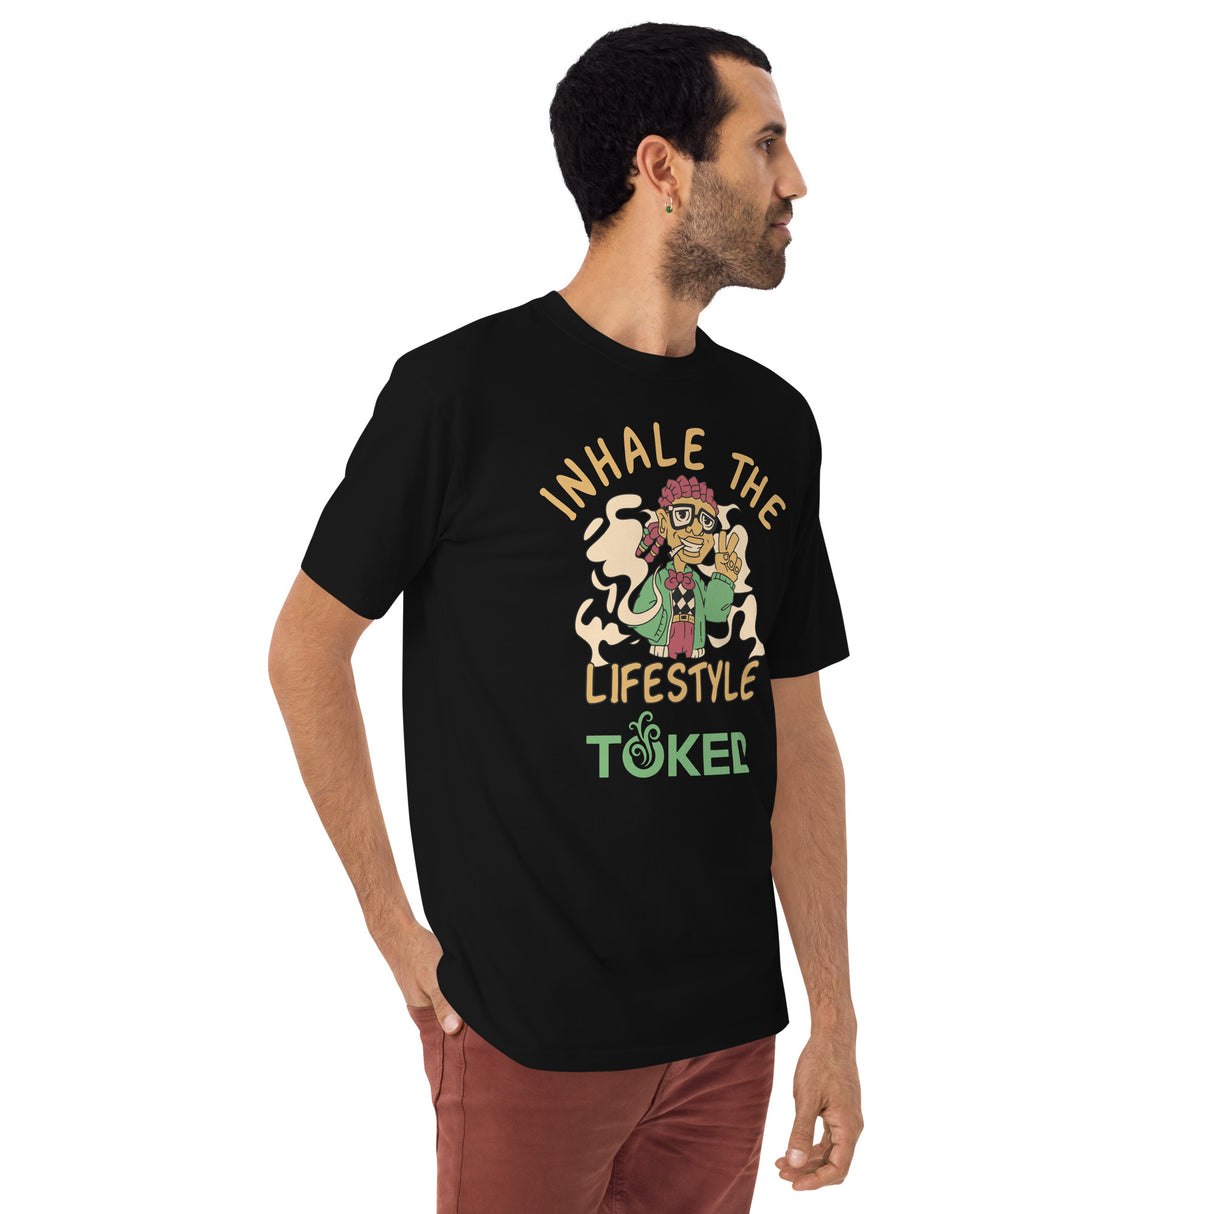 Inhale the Lifestyle T-shirt